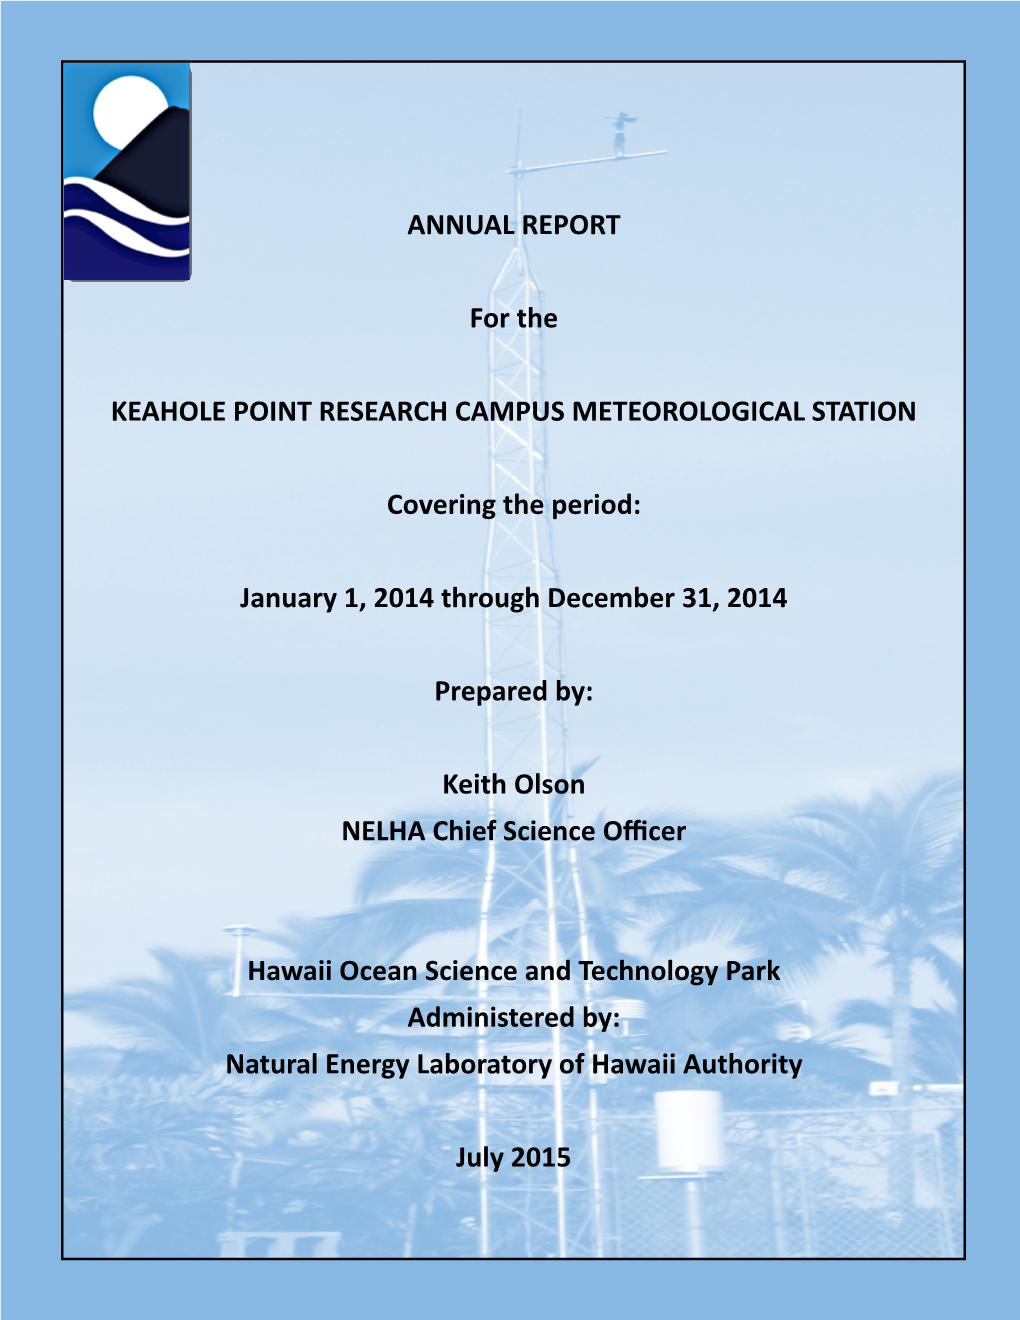 ANNUAL REPORT for the KEAHOLE POINT RESEARCH CAMPUS